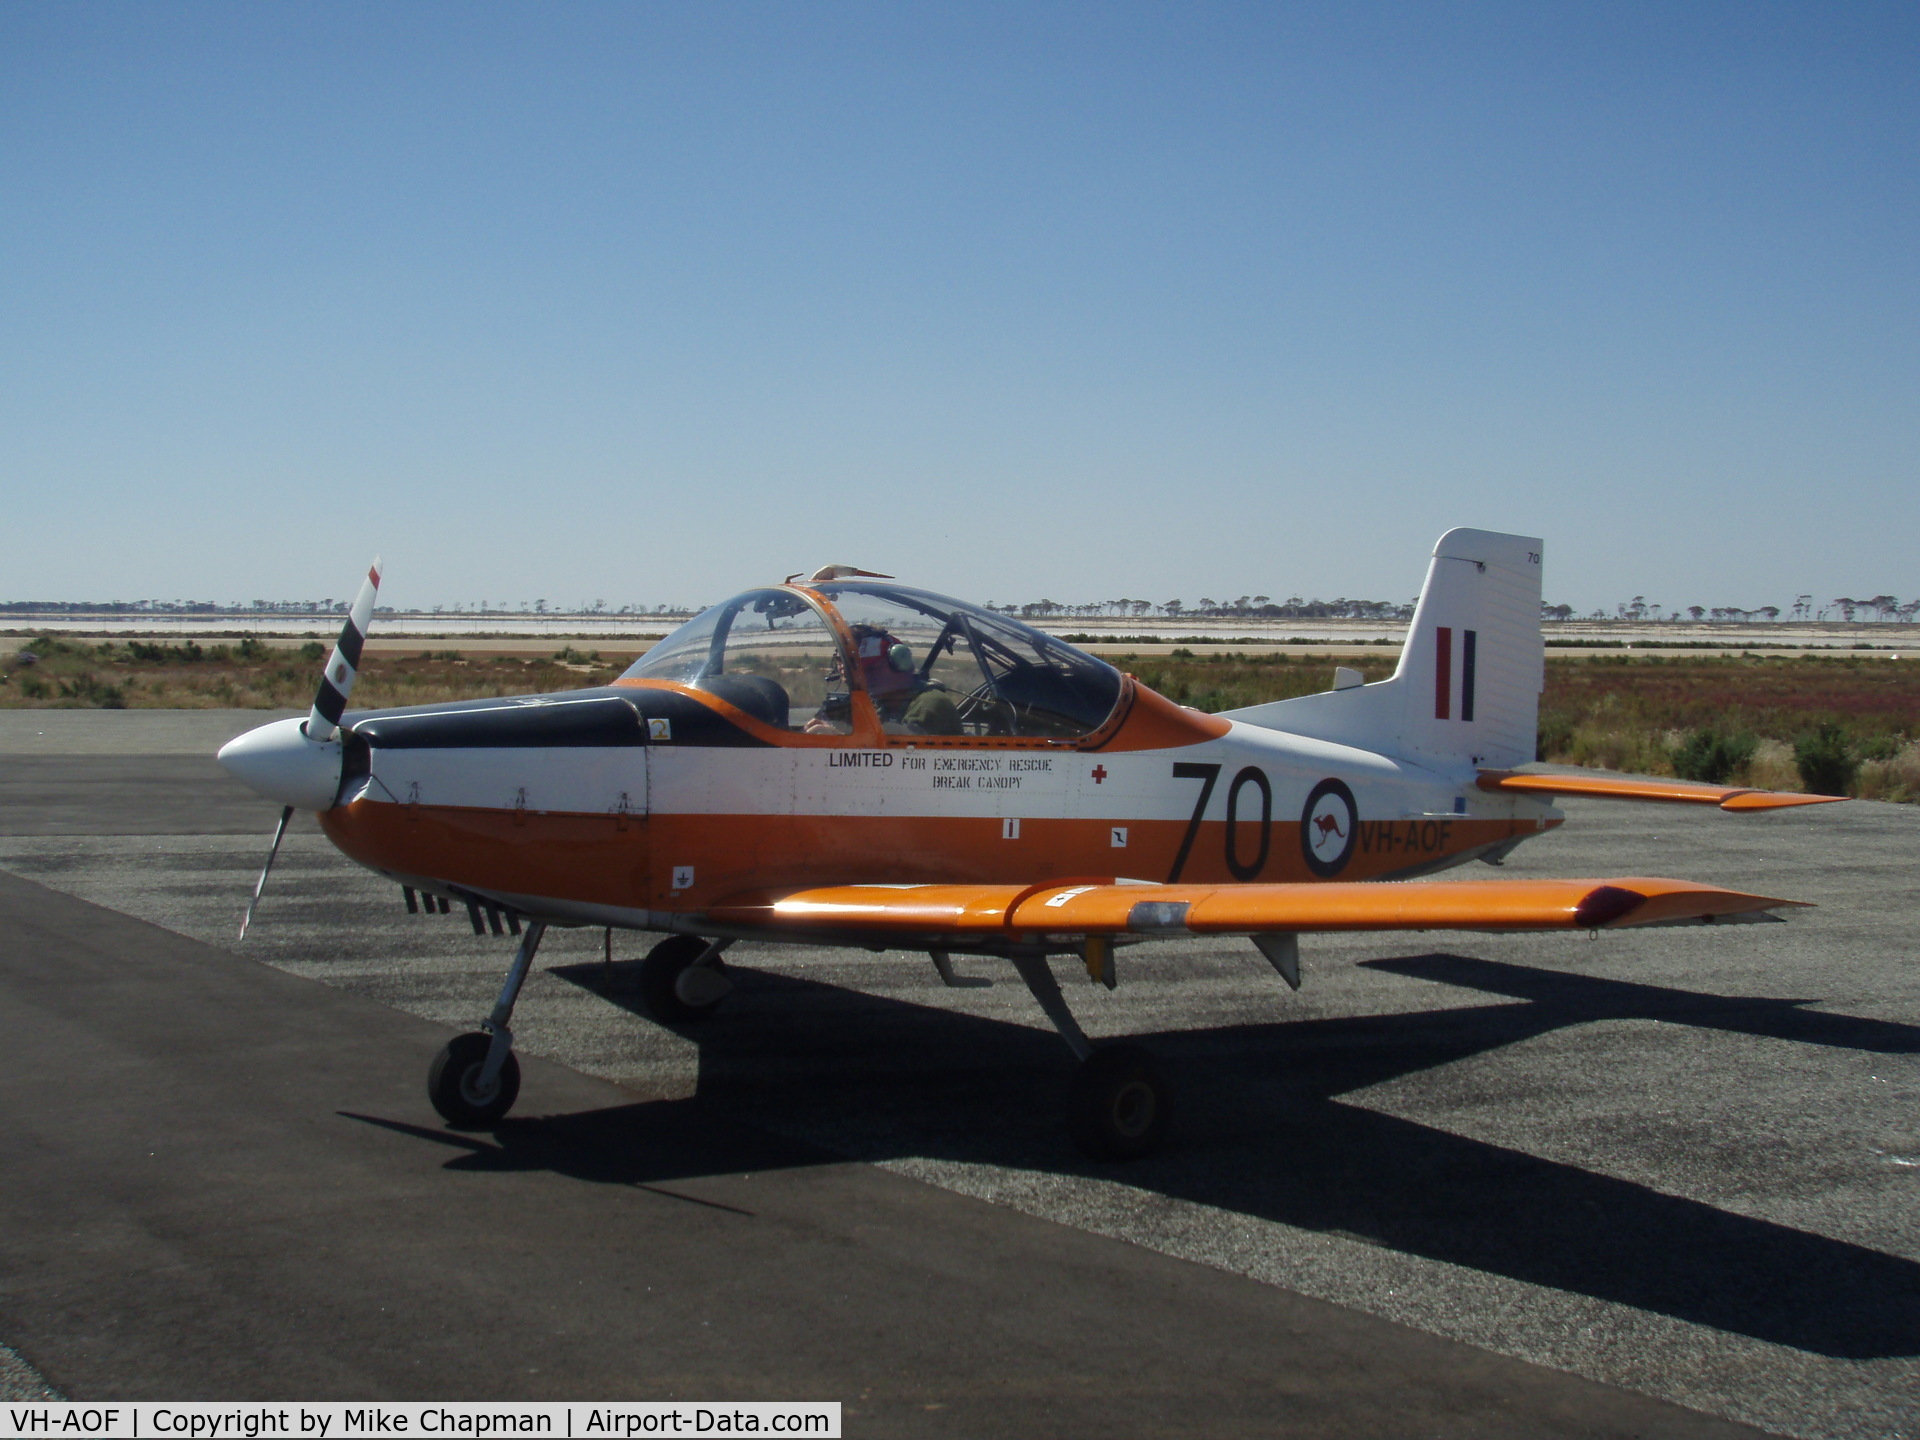 VH-AOF, 1976 New Zealand CT-4A Airtrainer C/N 070, On apron at Lake Grace air strip/